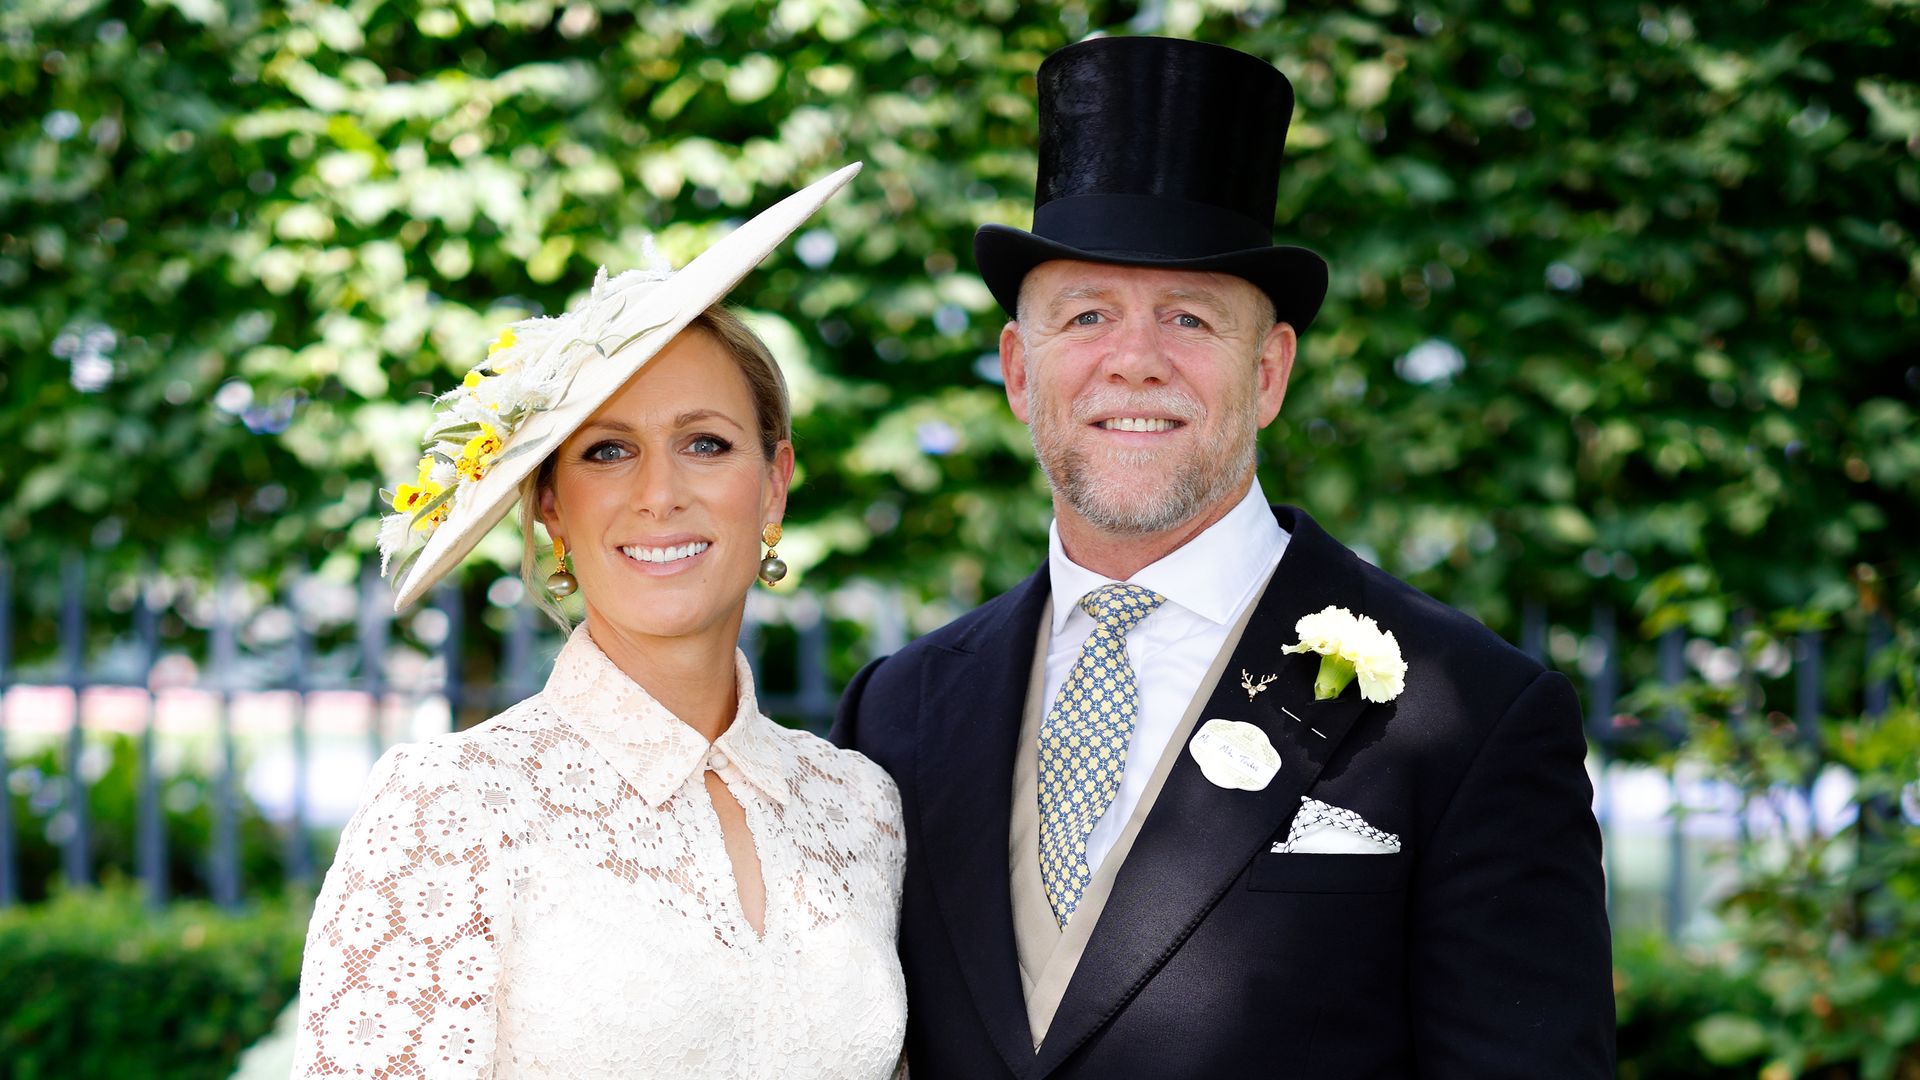 Zara and Mike Tindall's garden at Gatcombe Estate goes on as far as the eye can see